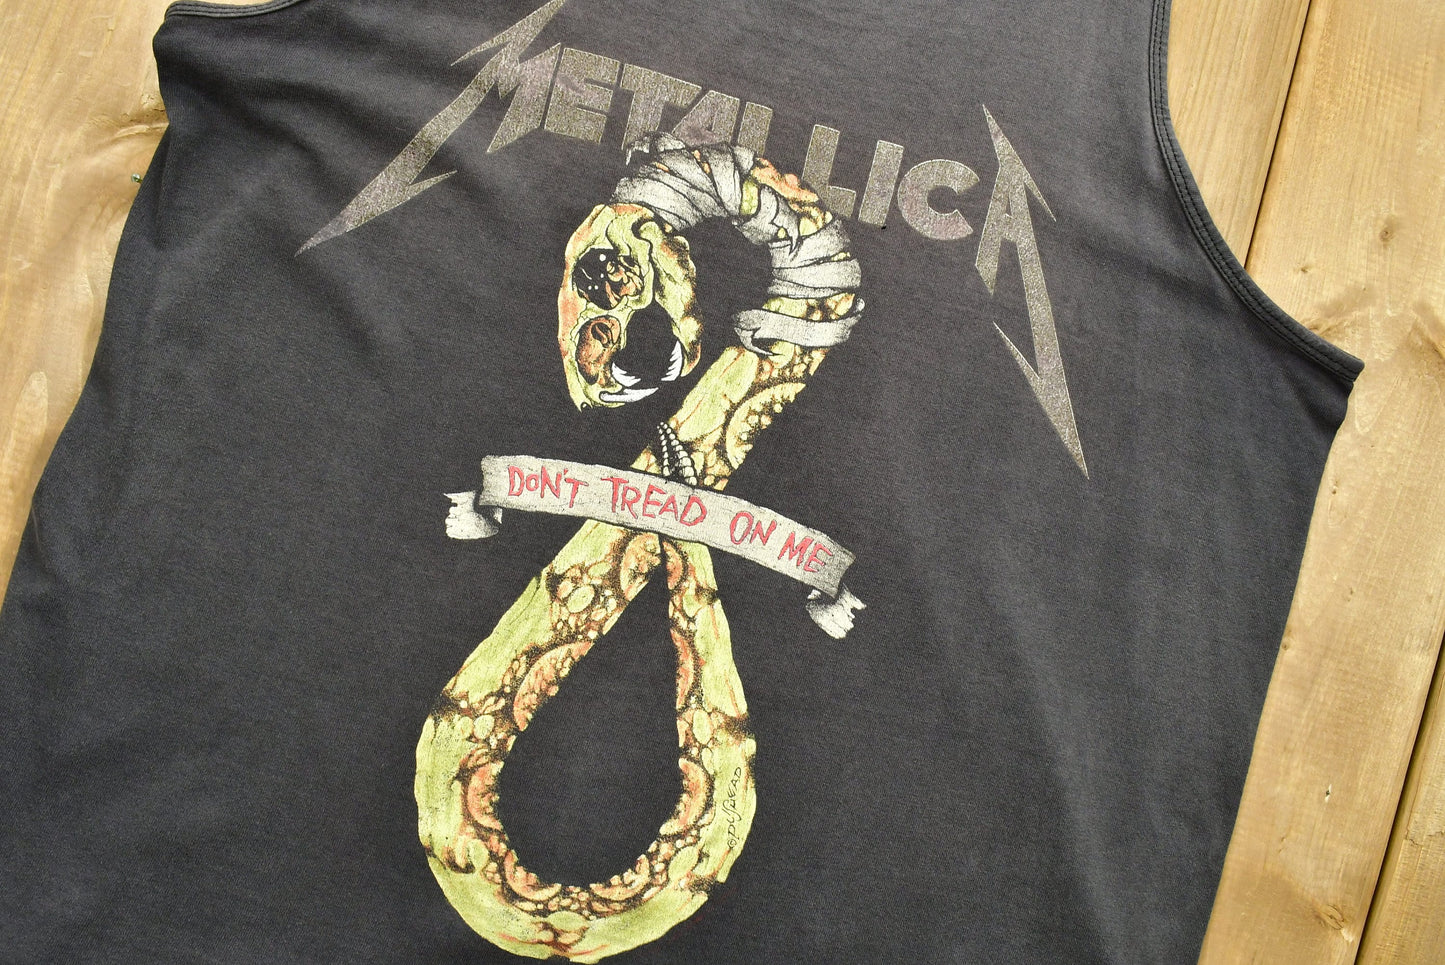 Vintage 90&#39;s Metallica Band Graphic / Vintage Tank Top / Single Stitch / Music Promo Print / Concert / Tour / Made In USA / Retro Style